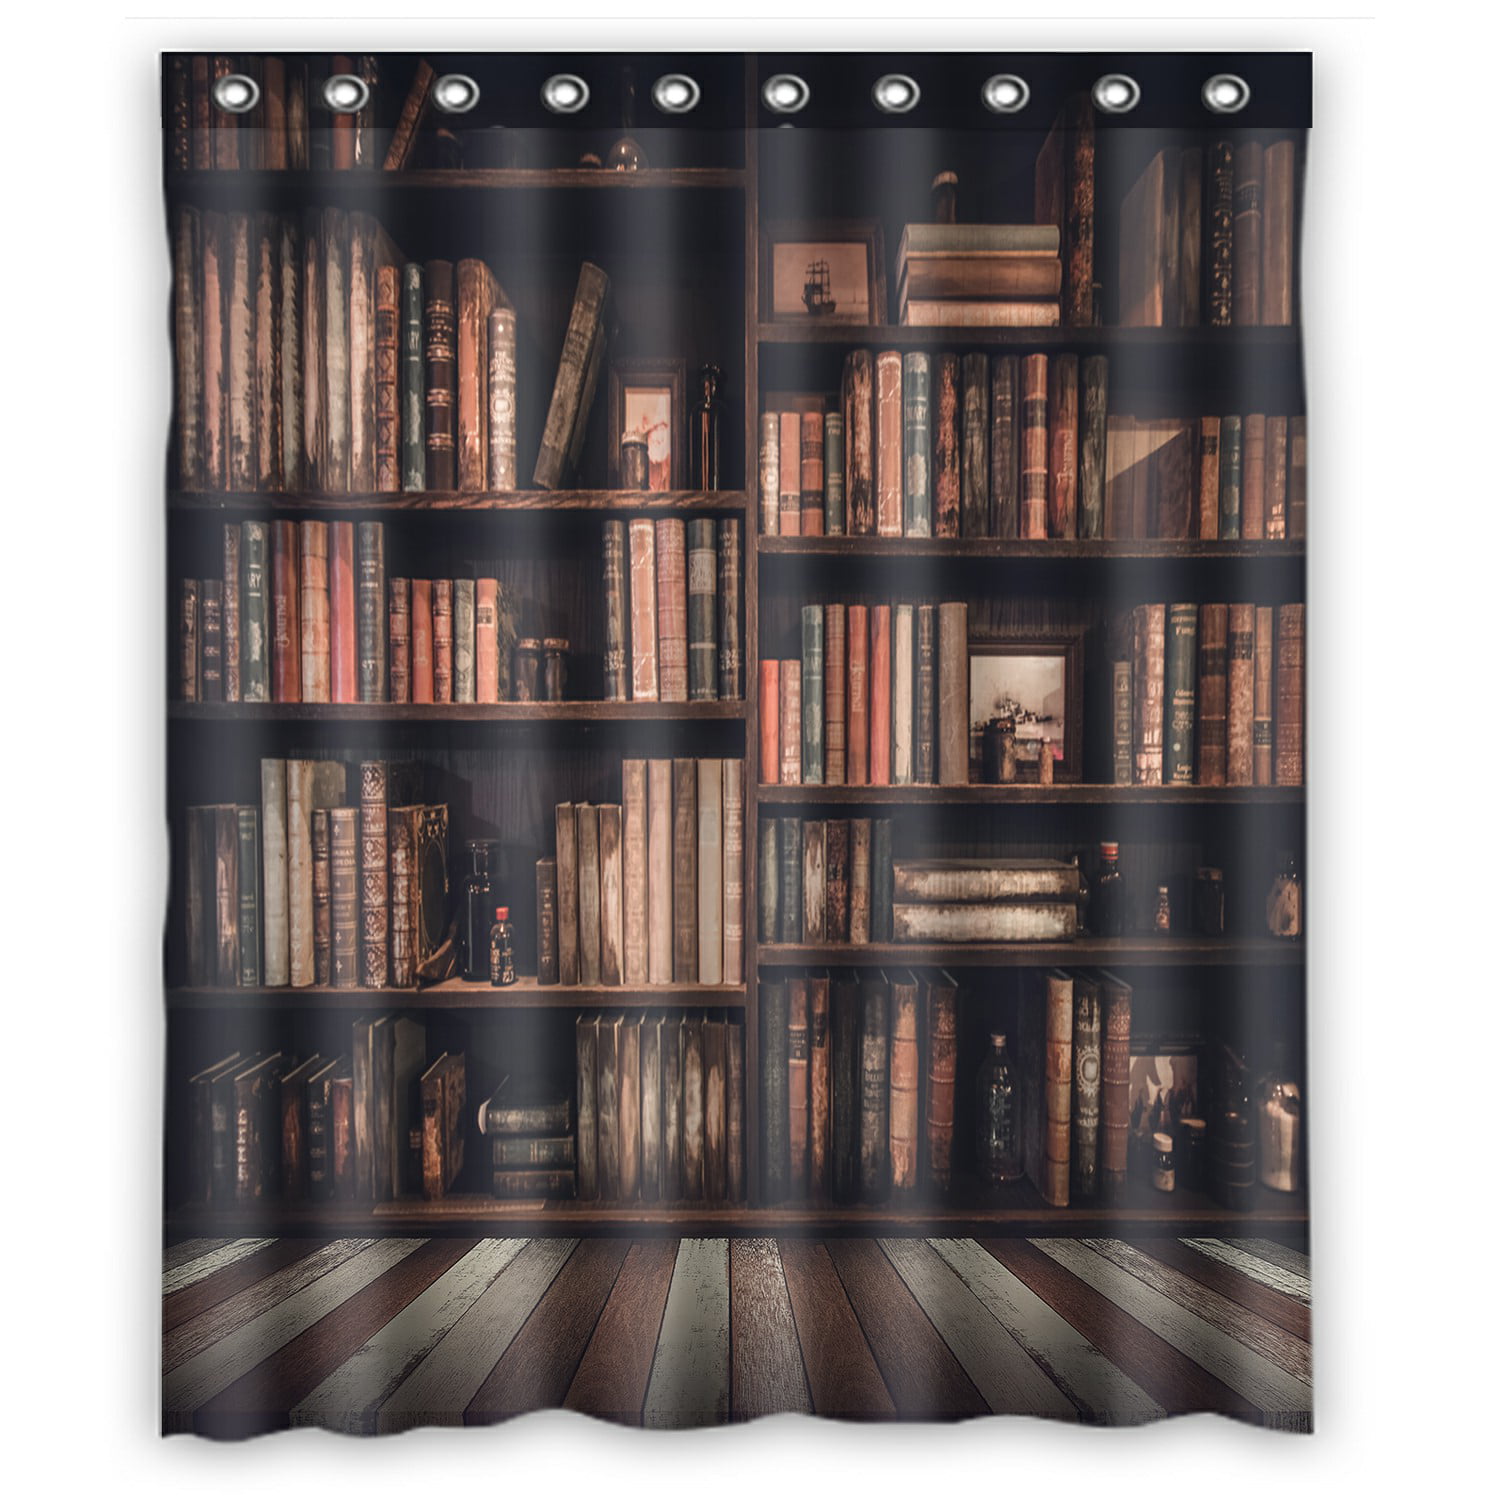 Bookshelves and Books Bathroom Fabric Shower Curtain Set With Hooks 71Inch Long 